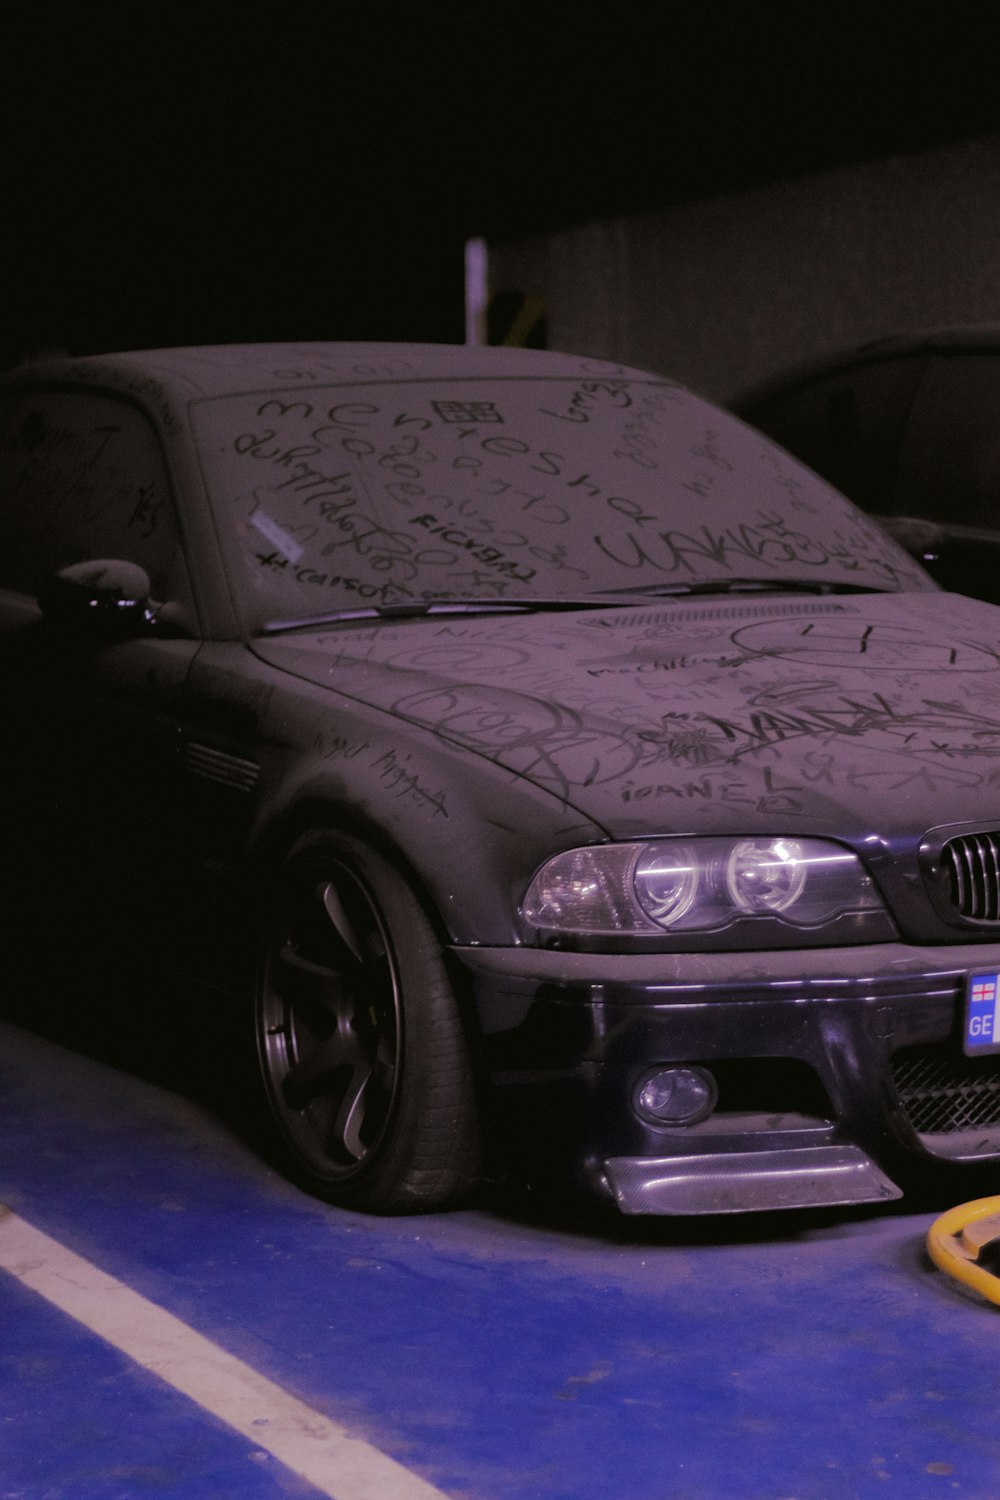 a car parked in a parking lot with graffiti on it